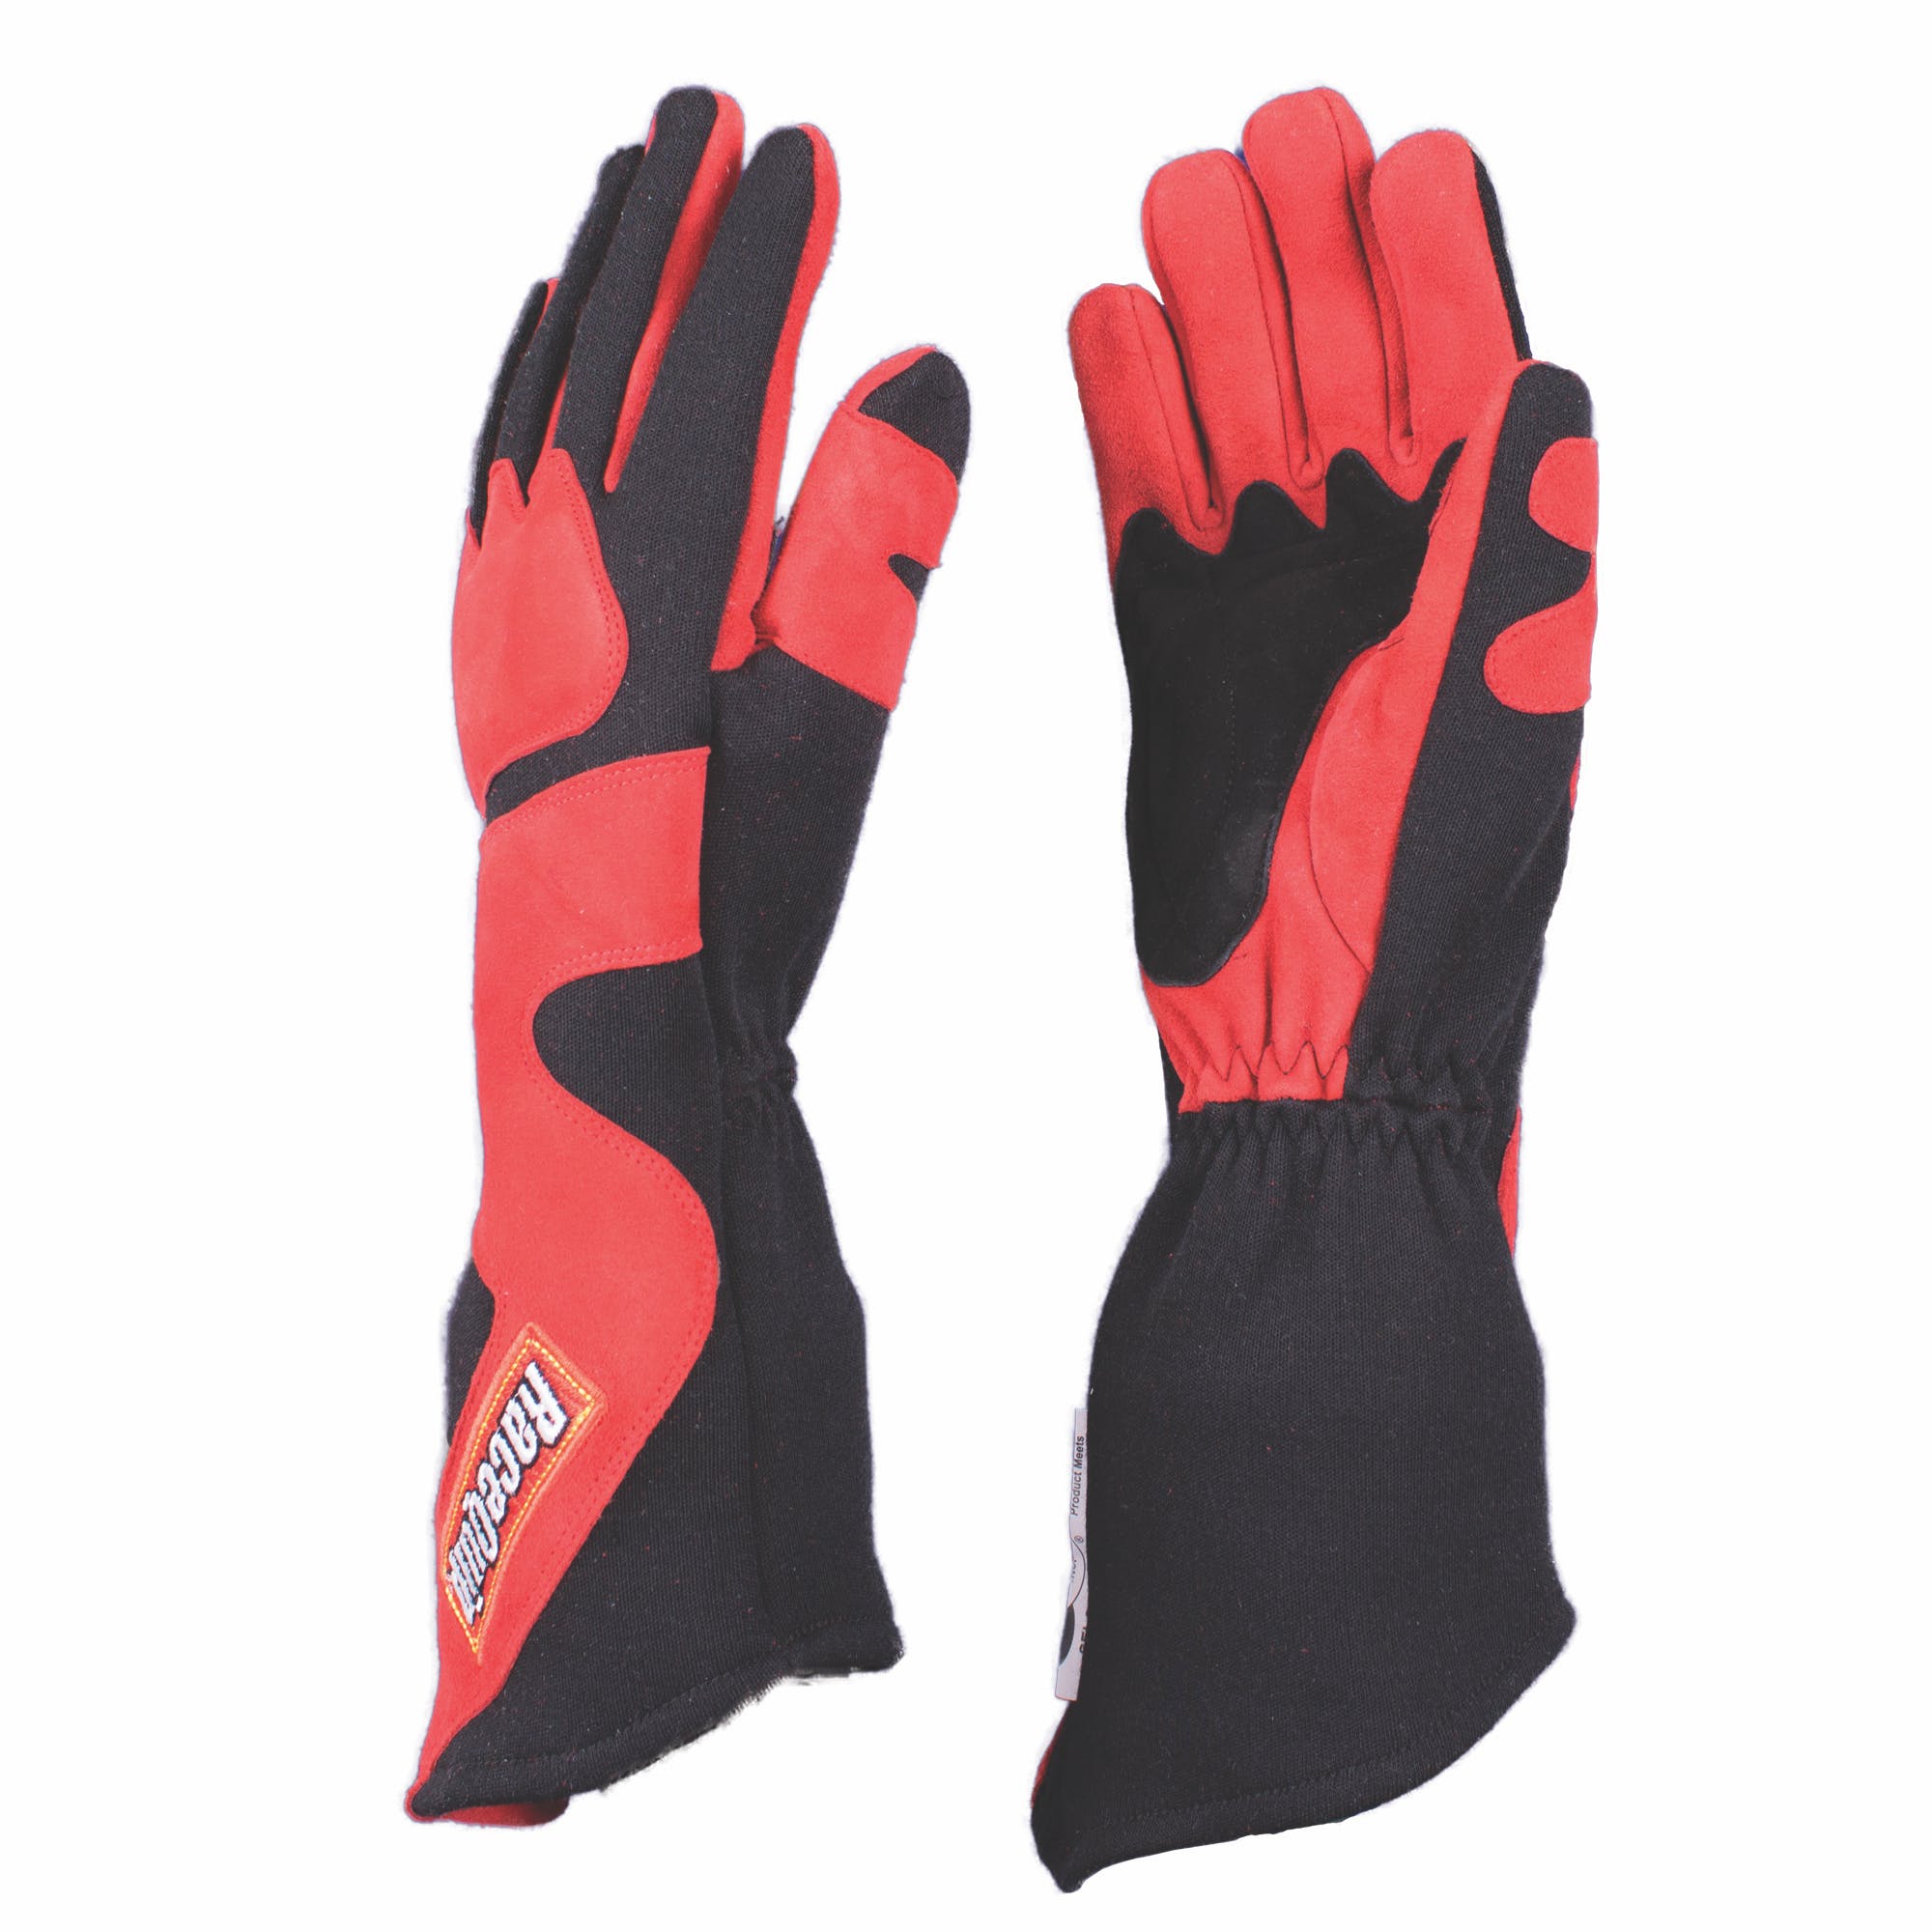 RaceQuip 358102 SFI-5 Angle-Cut Long Gauntlet Racing Gloves (Red/Black, Small)